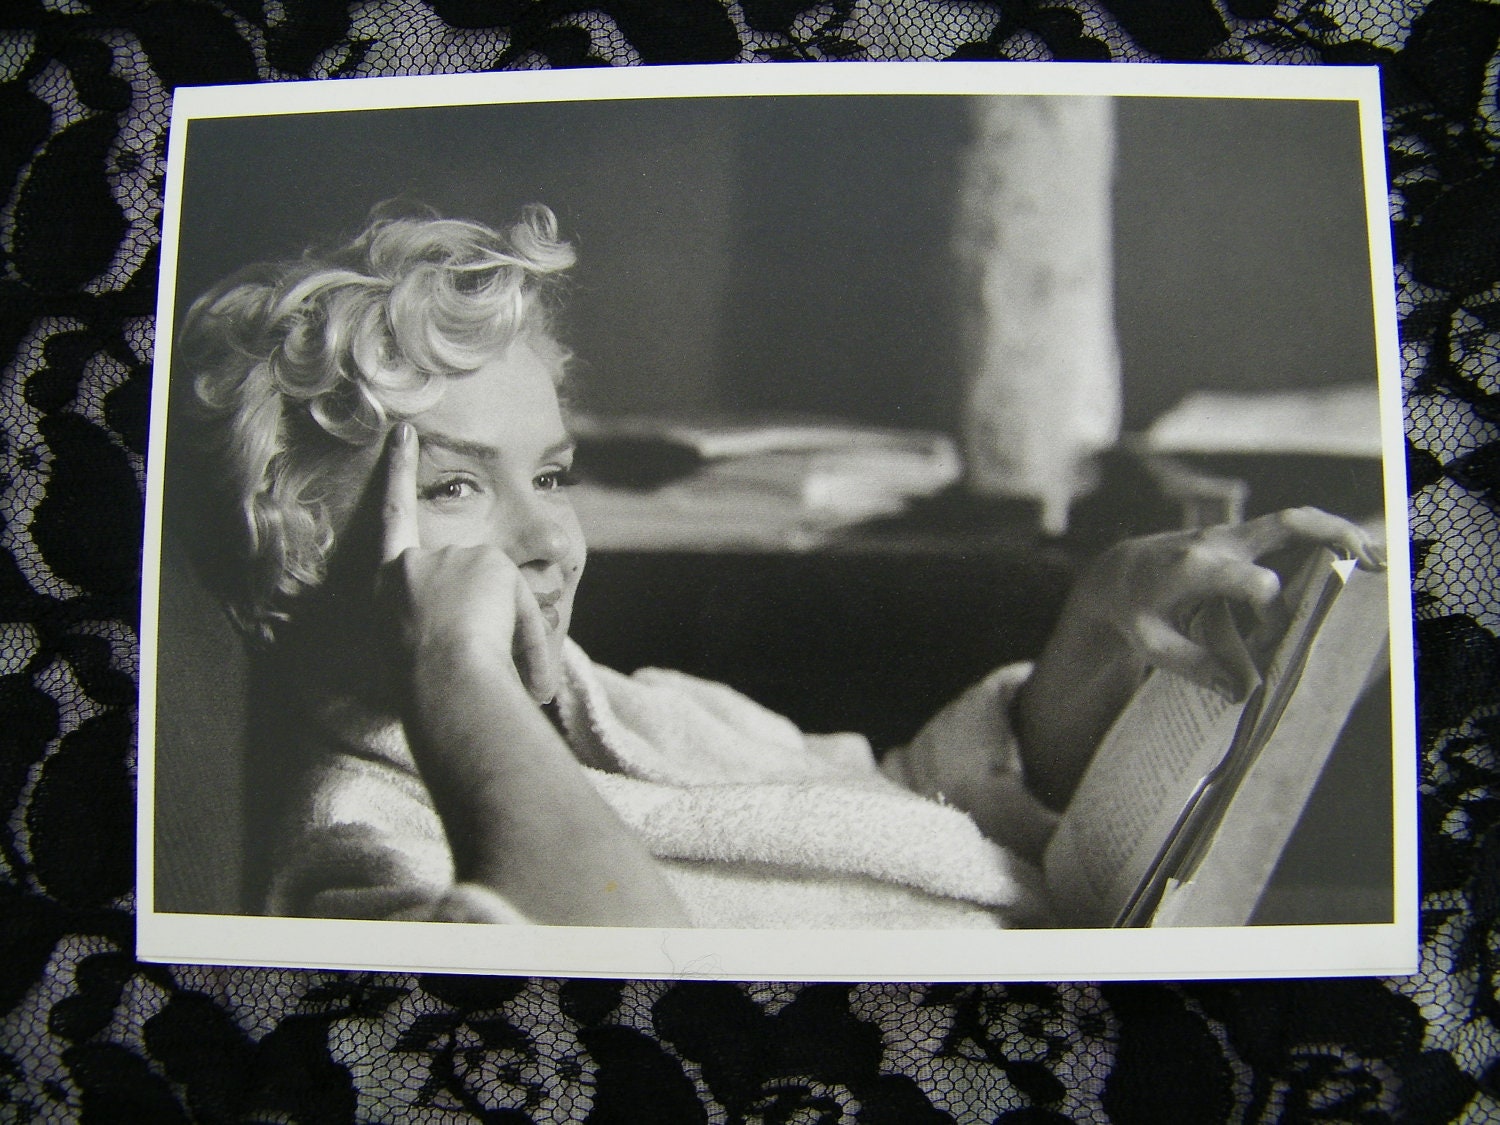 FREE SHIPPING Vintage 1980s Black & White Marilyn Monroe Plain Greeting Card Printed in France - xocream